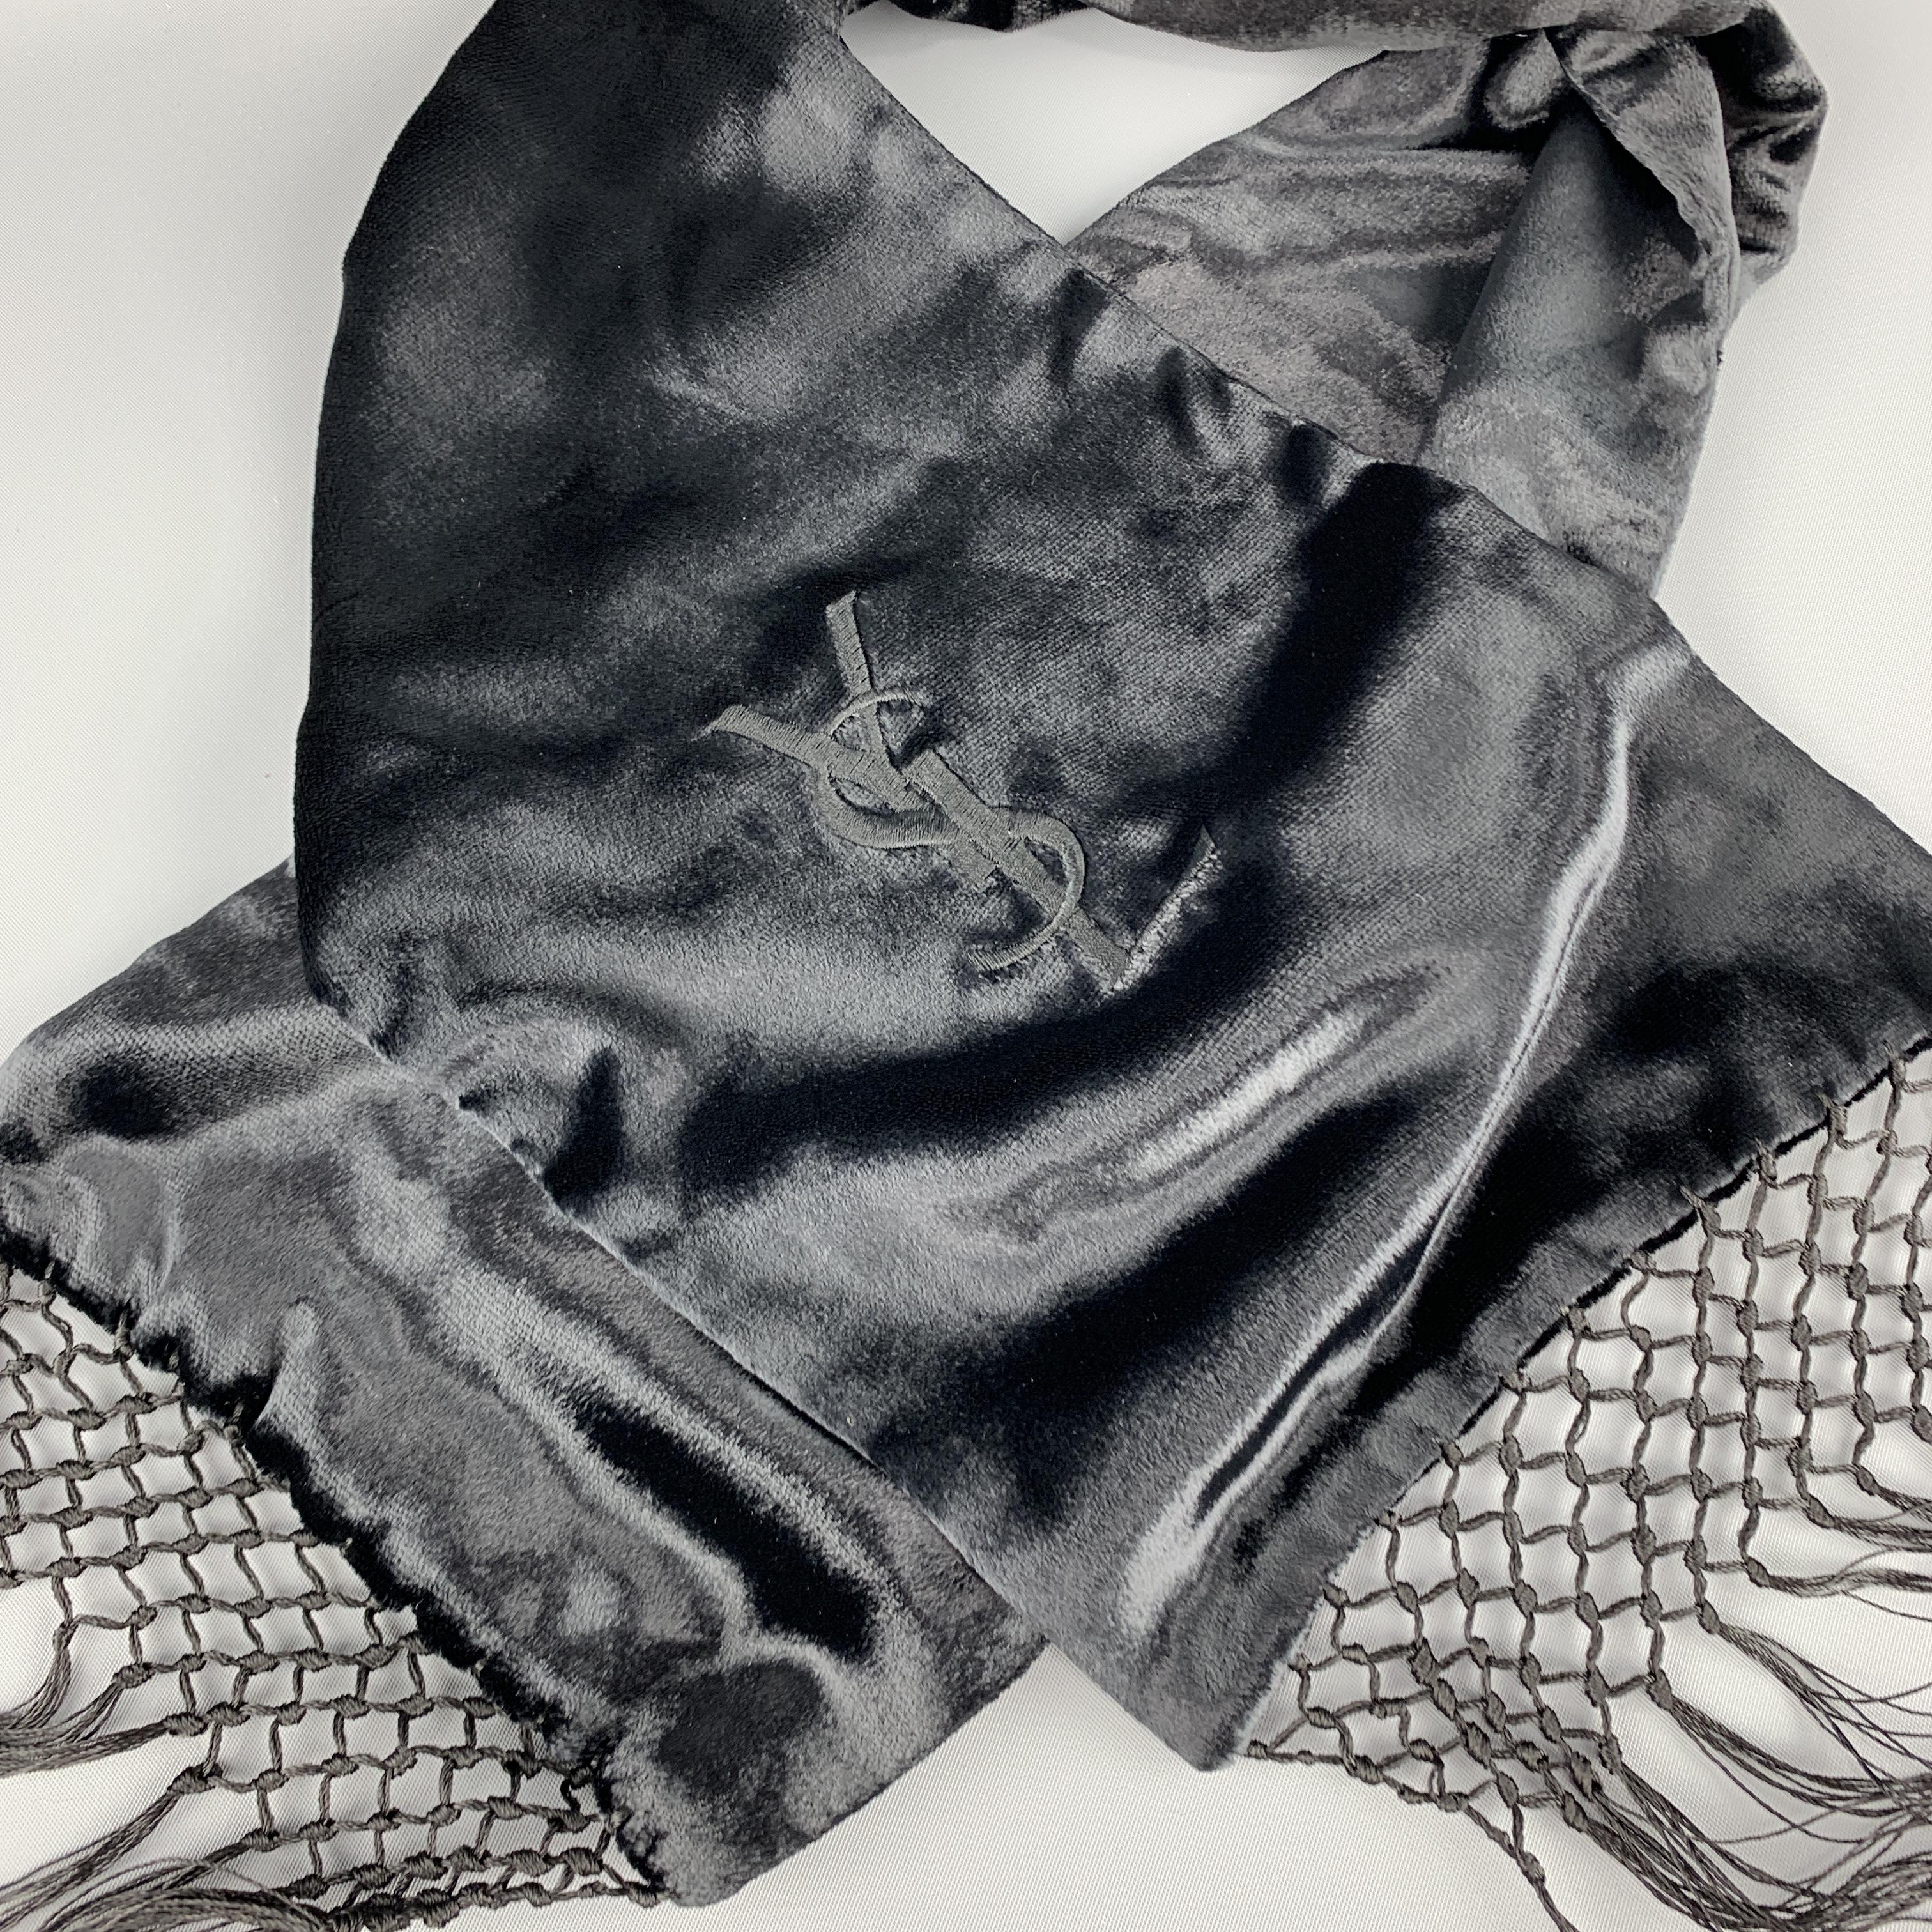 Archive YVES SAINT LAURENT neck scarf comes in black velvet with an embroidered YSL logo and long braided fringe trim. Made in Italy.
 
New with Tags.
 
Length: 37 in.
Width: 7 in.
Fringe: 13 in.